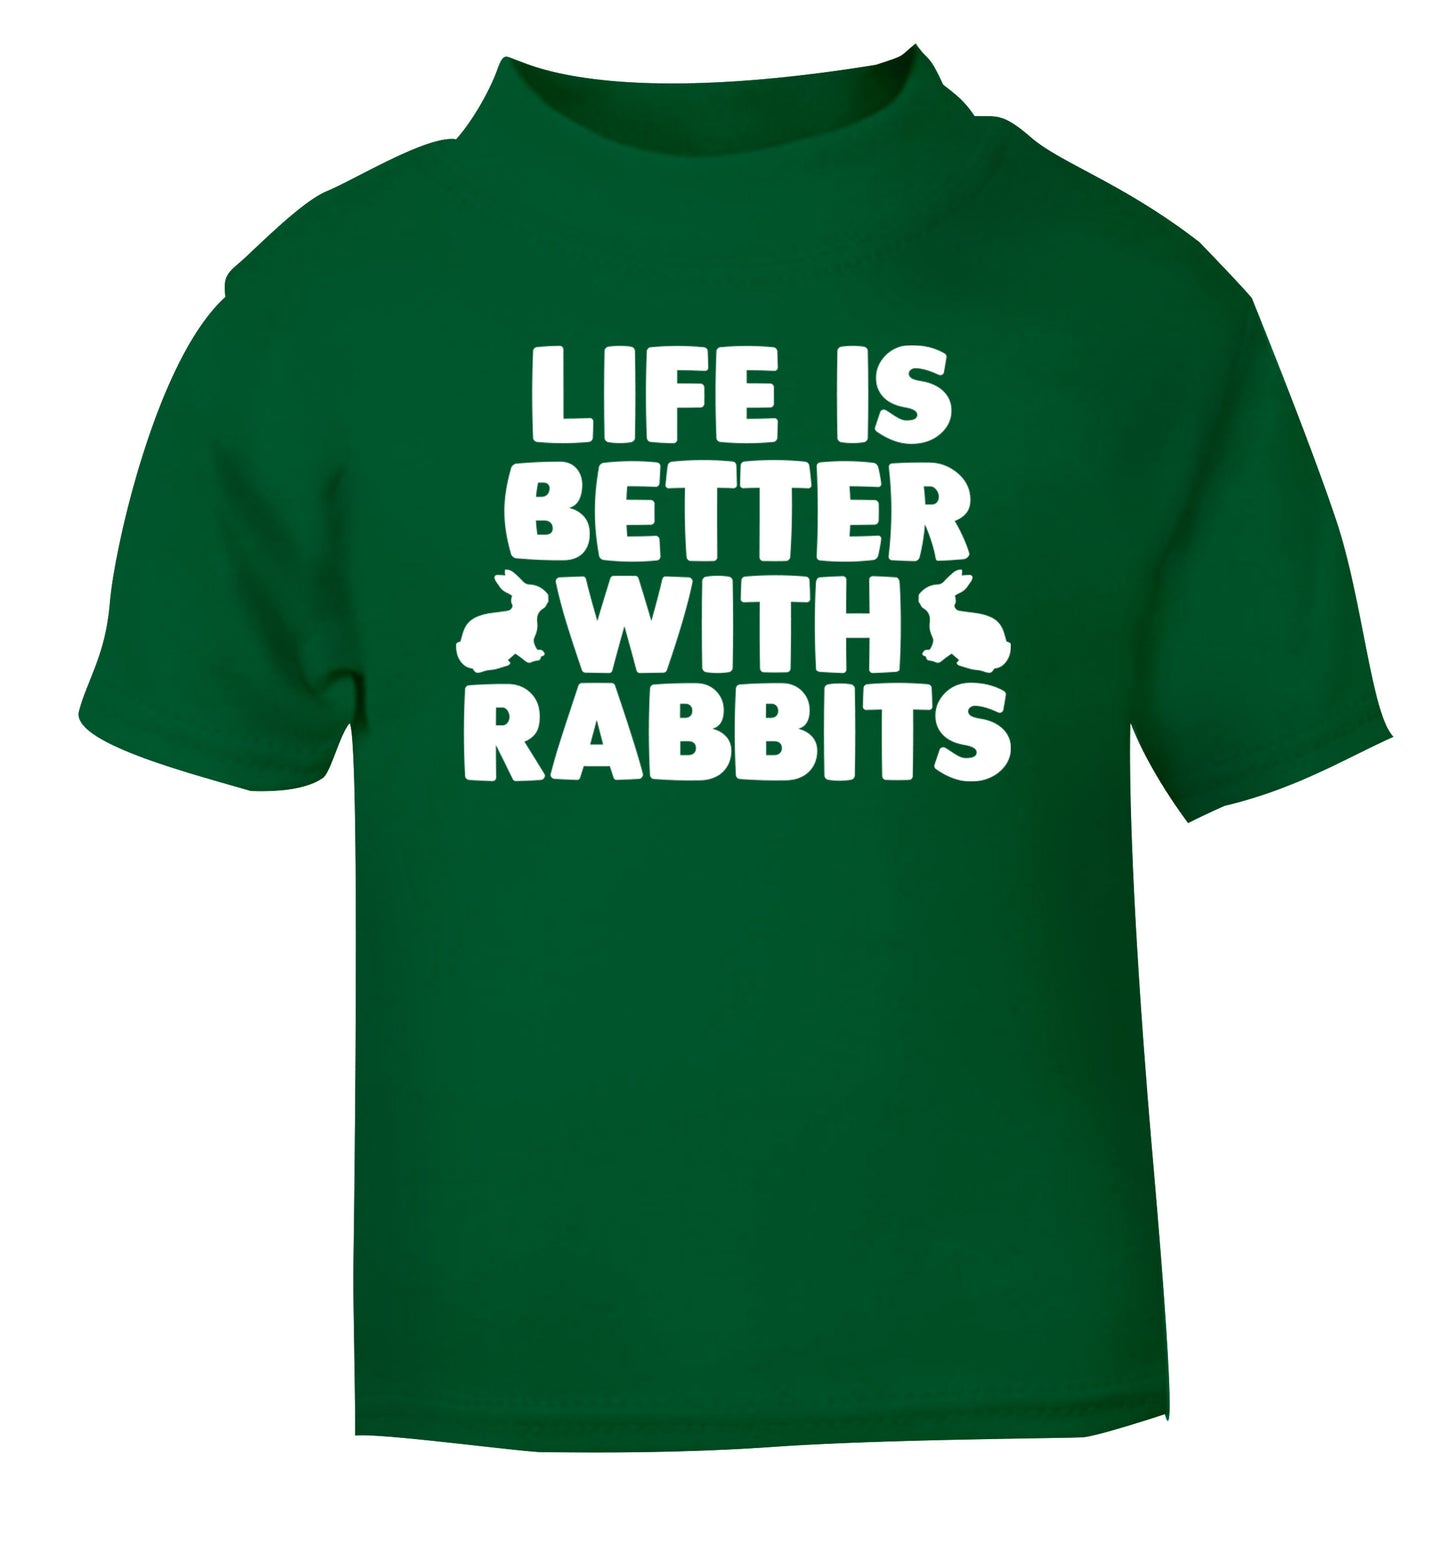 Life is better with rabbits green Baby Toddler Tshirt 2 Years